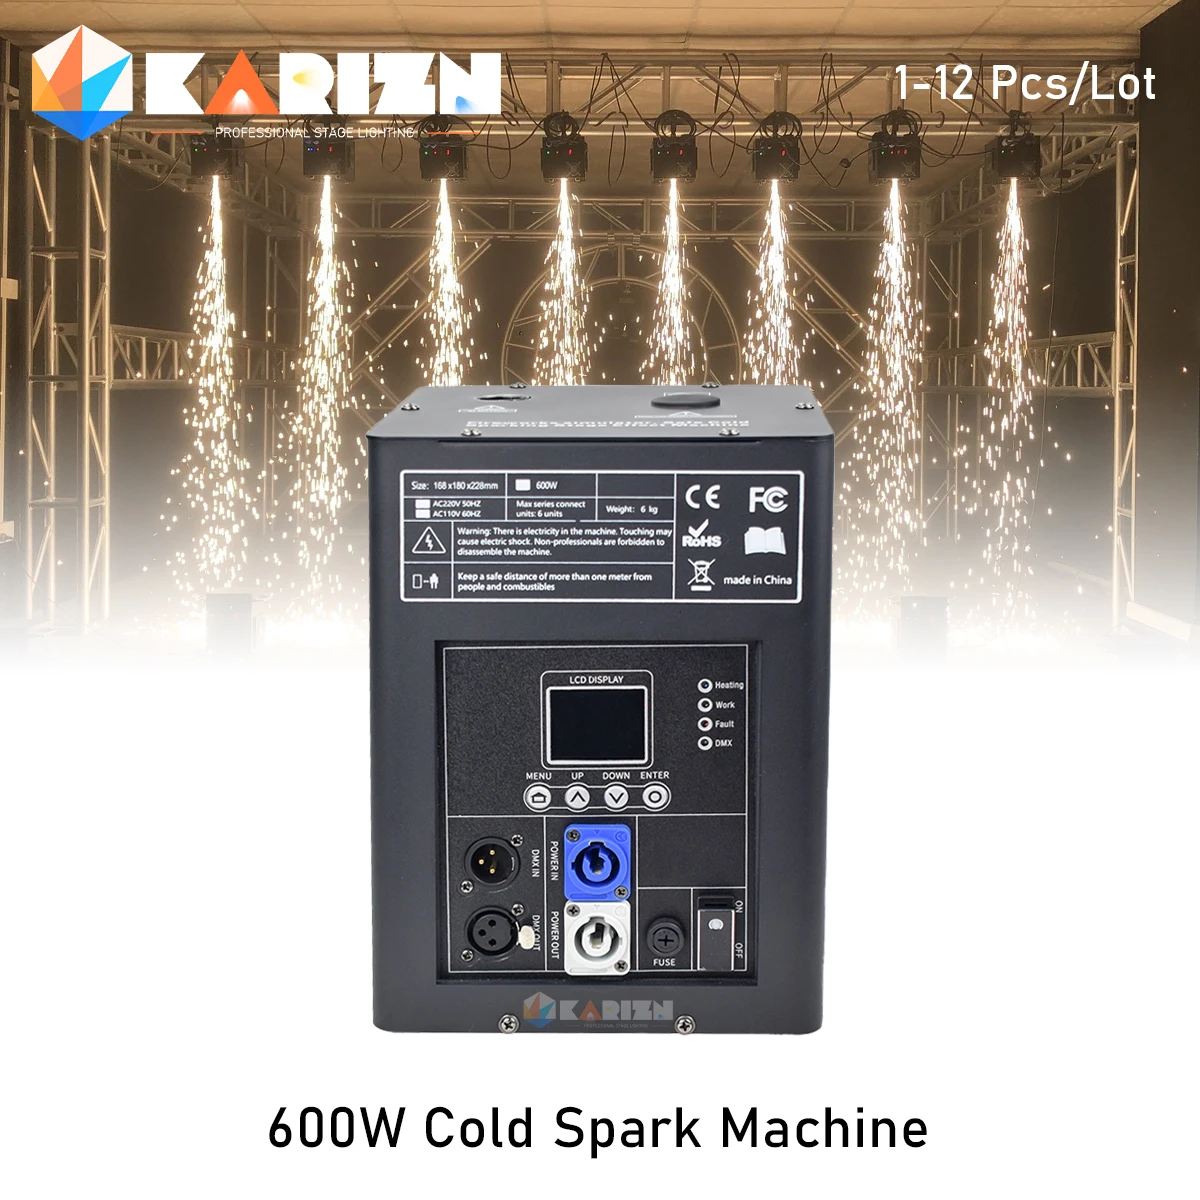 

0 Tax 1-12Pcs/Lot 600W Cold Spark Machine DMX Fireworks Fountain Spark Stage Effect For Wedding Party Sparkler Special Equipment